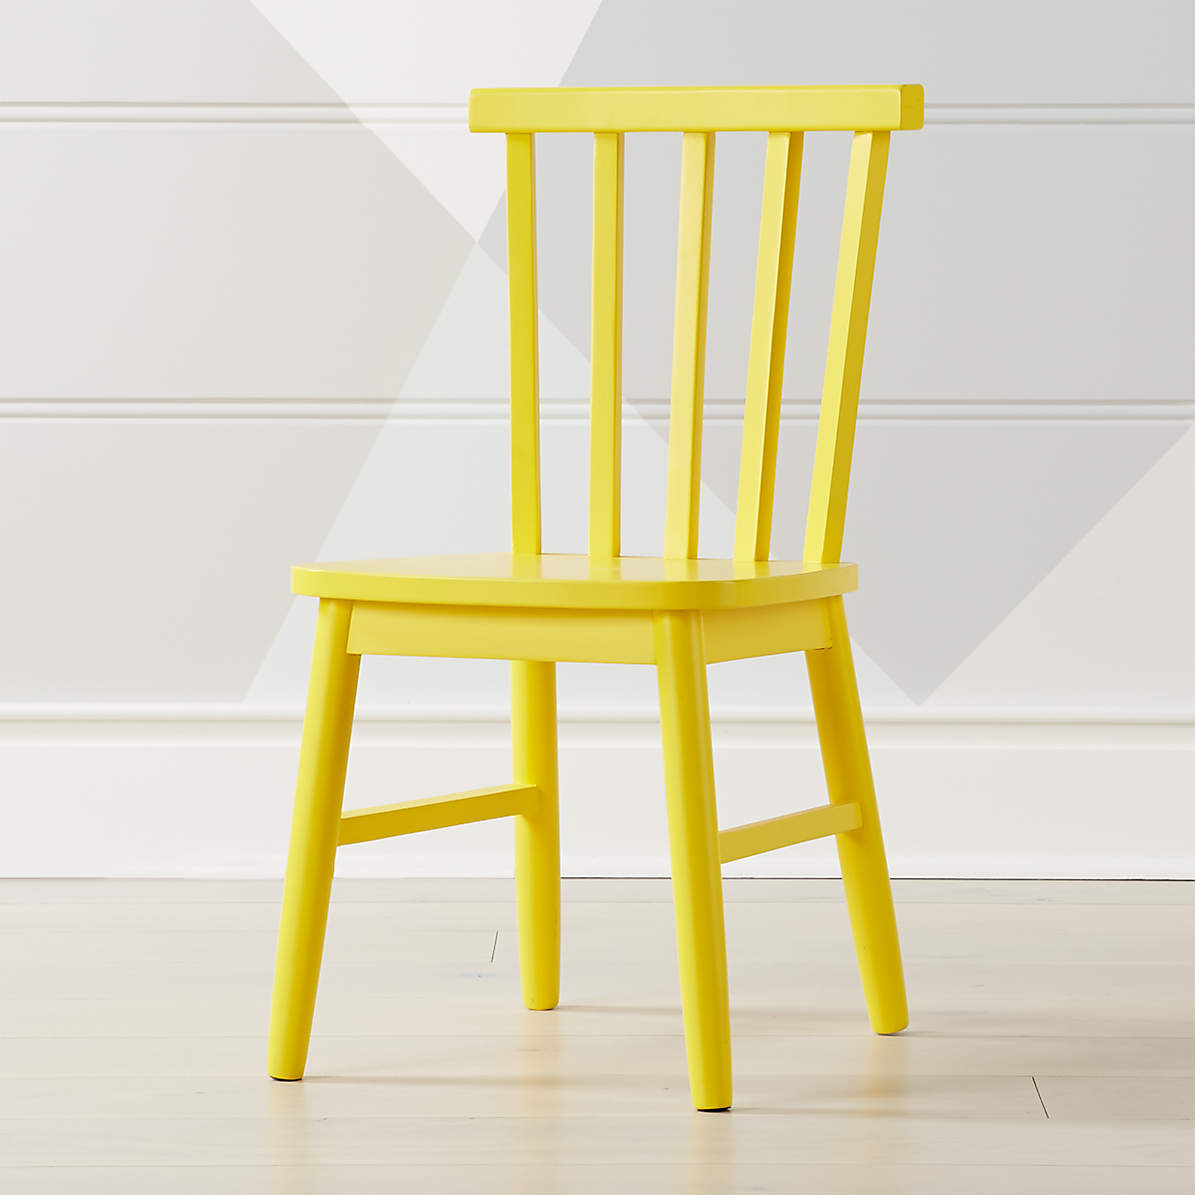 yellow chair for kids